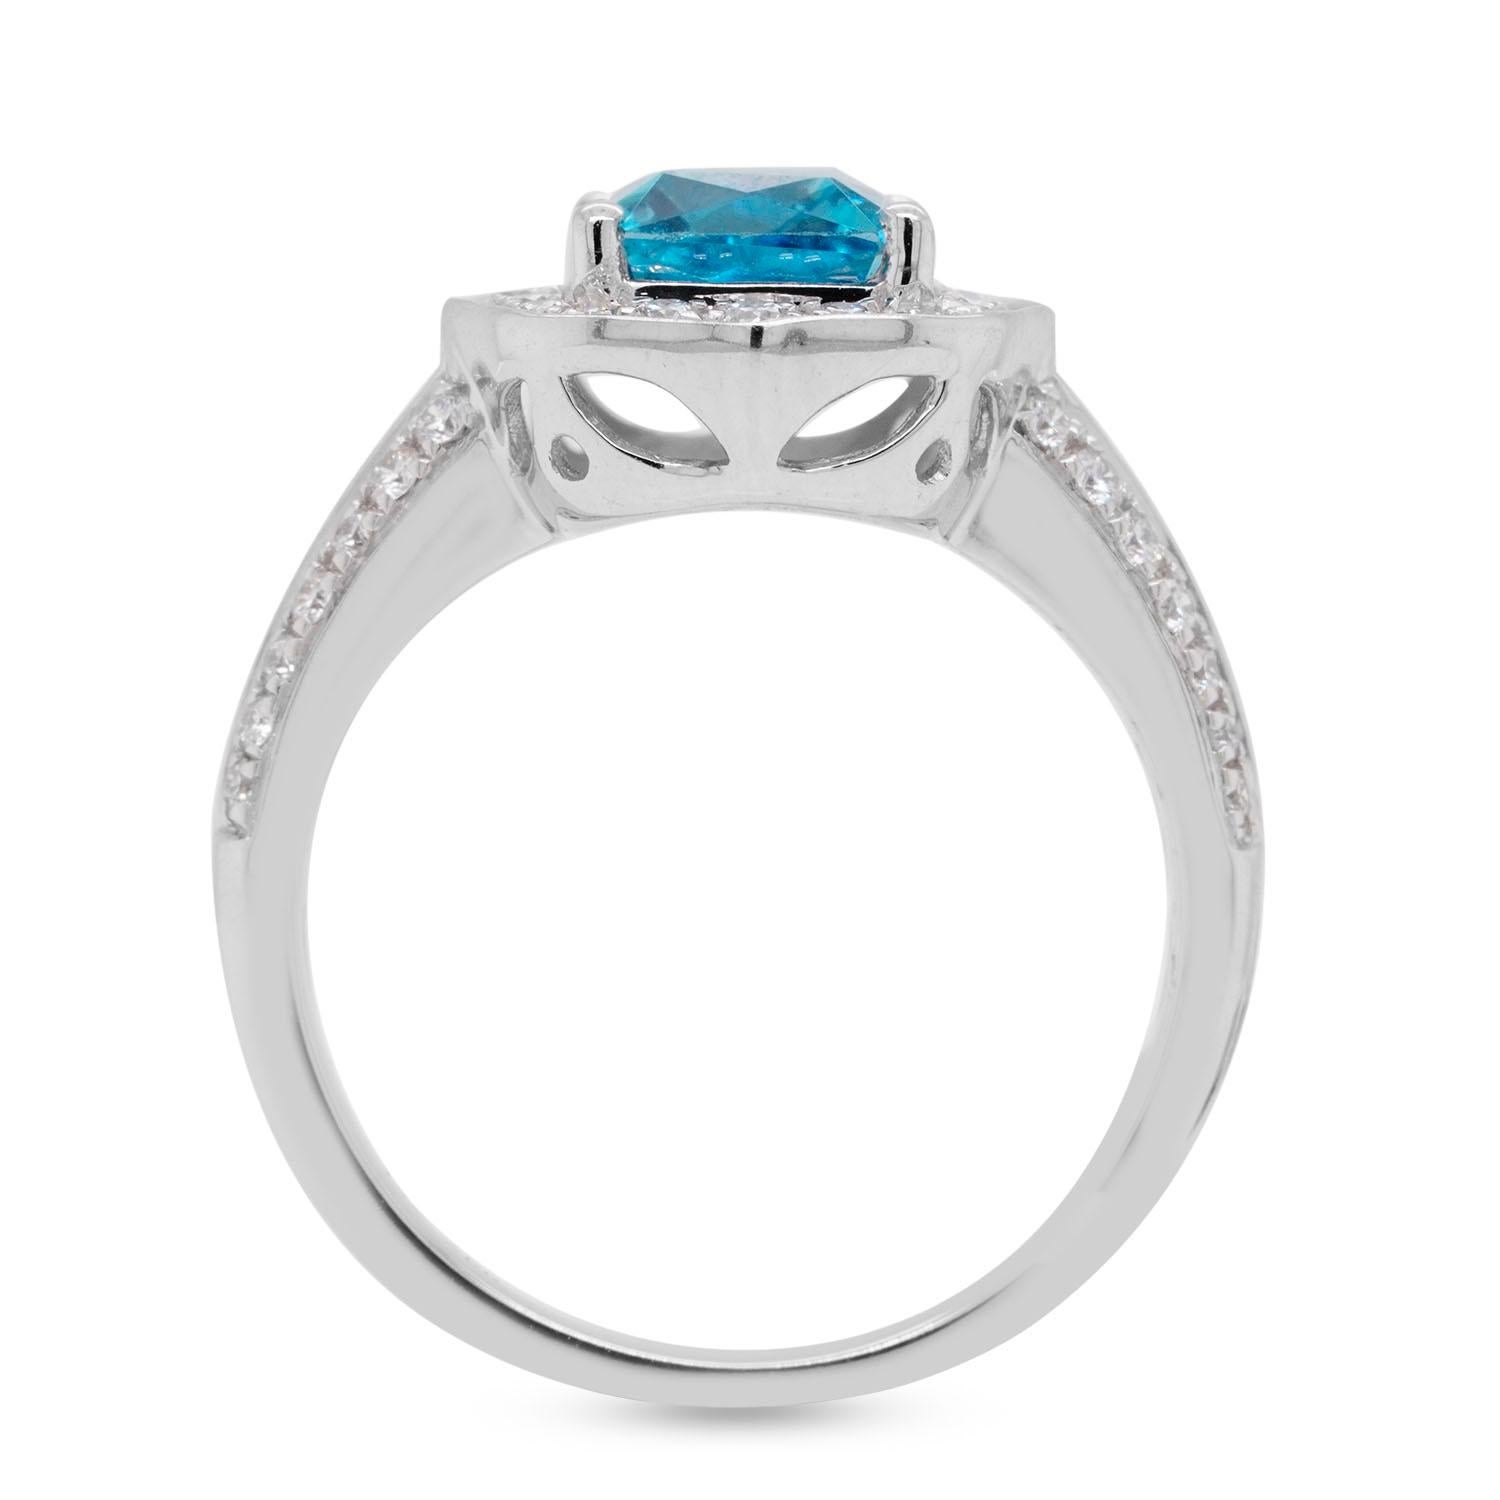 Designed with a marvelous Emerald cut Blue Zircon, the beauty of this gemstone leaves a lasting impression wherever you go. This captivating ring is further accentuated by the glittering round cut Diamonds which draw focus to its bright color.